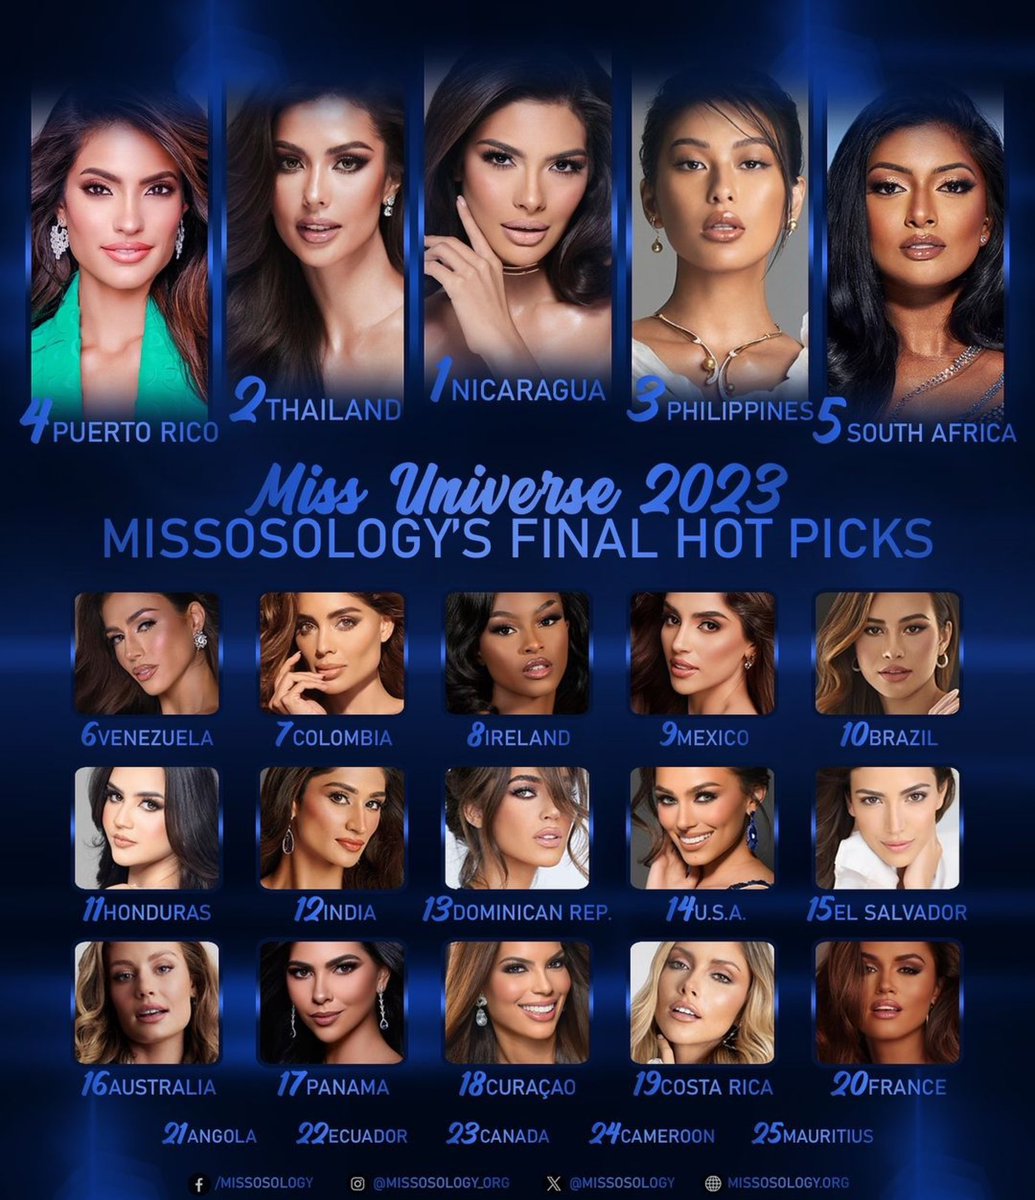 Yes or no ? #MissUniverse final hotpicks by @missosology 
Who do you think will win? 
1. Nicaragua – Sheynnis Palacios

2. Thailand – Anntonia Porsild

3. Philippines – Michelle Dee

4. Puerto Rico – Karla Guilfú

5. South Africa – Bryoni Govender

6. Venezuela – Diana Silva

7.…